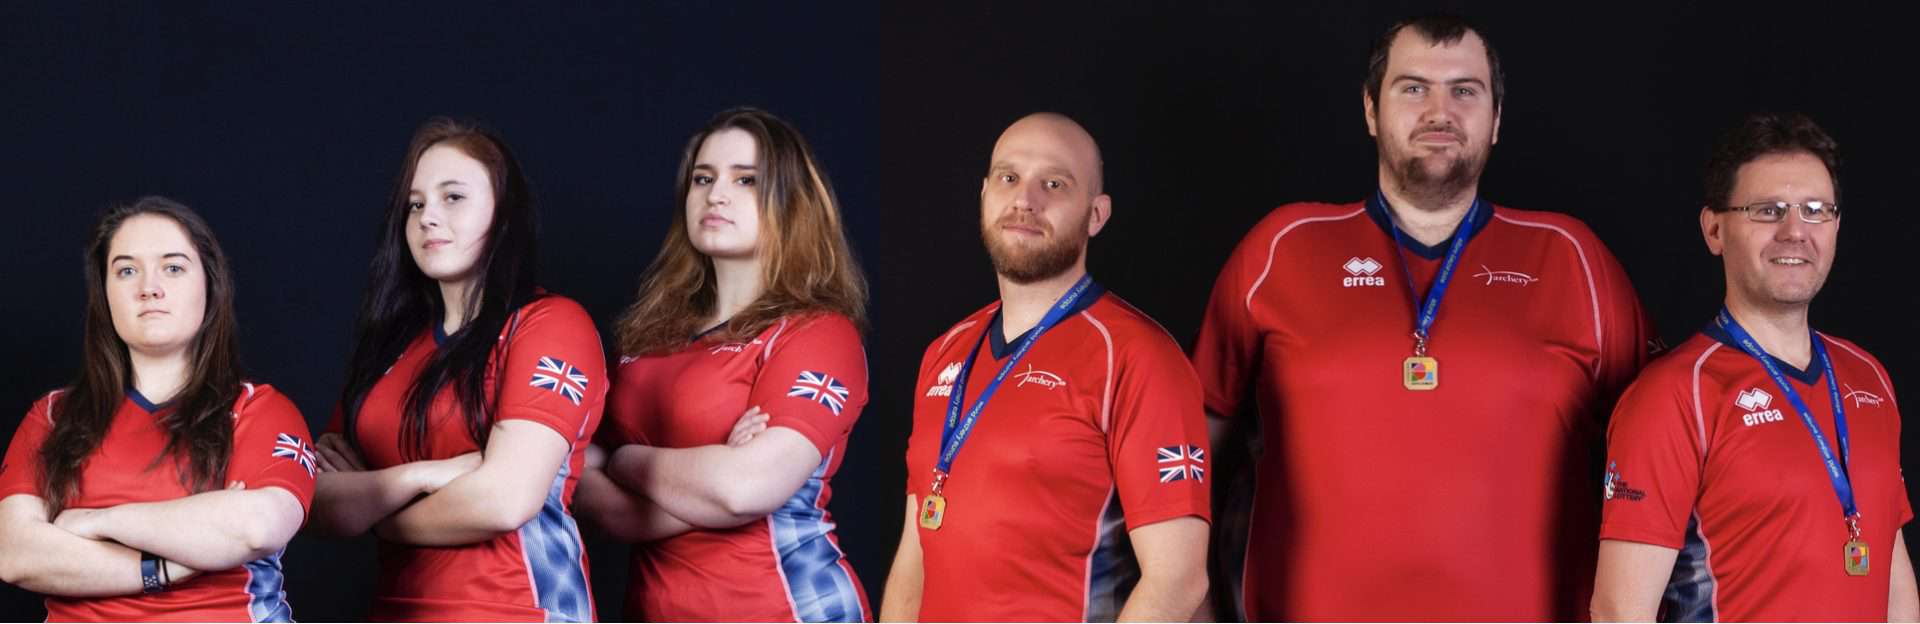 World Championships compound team named